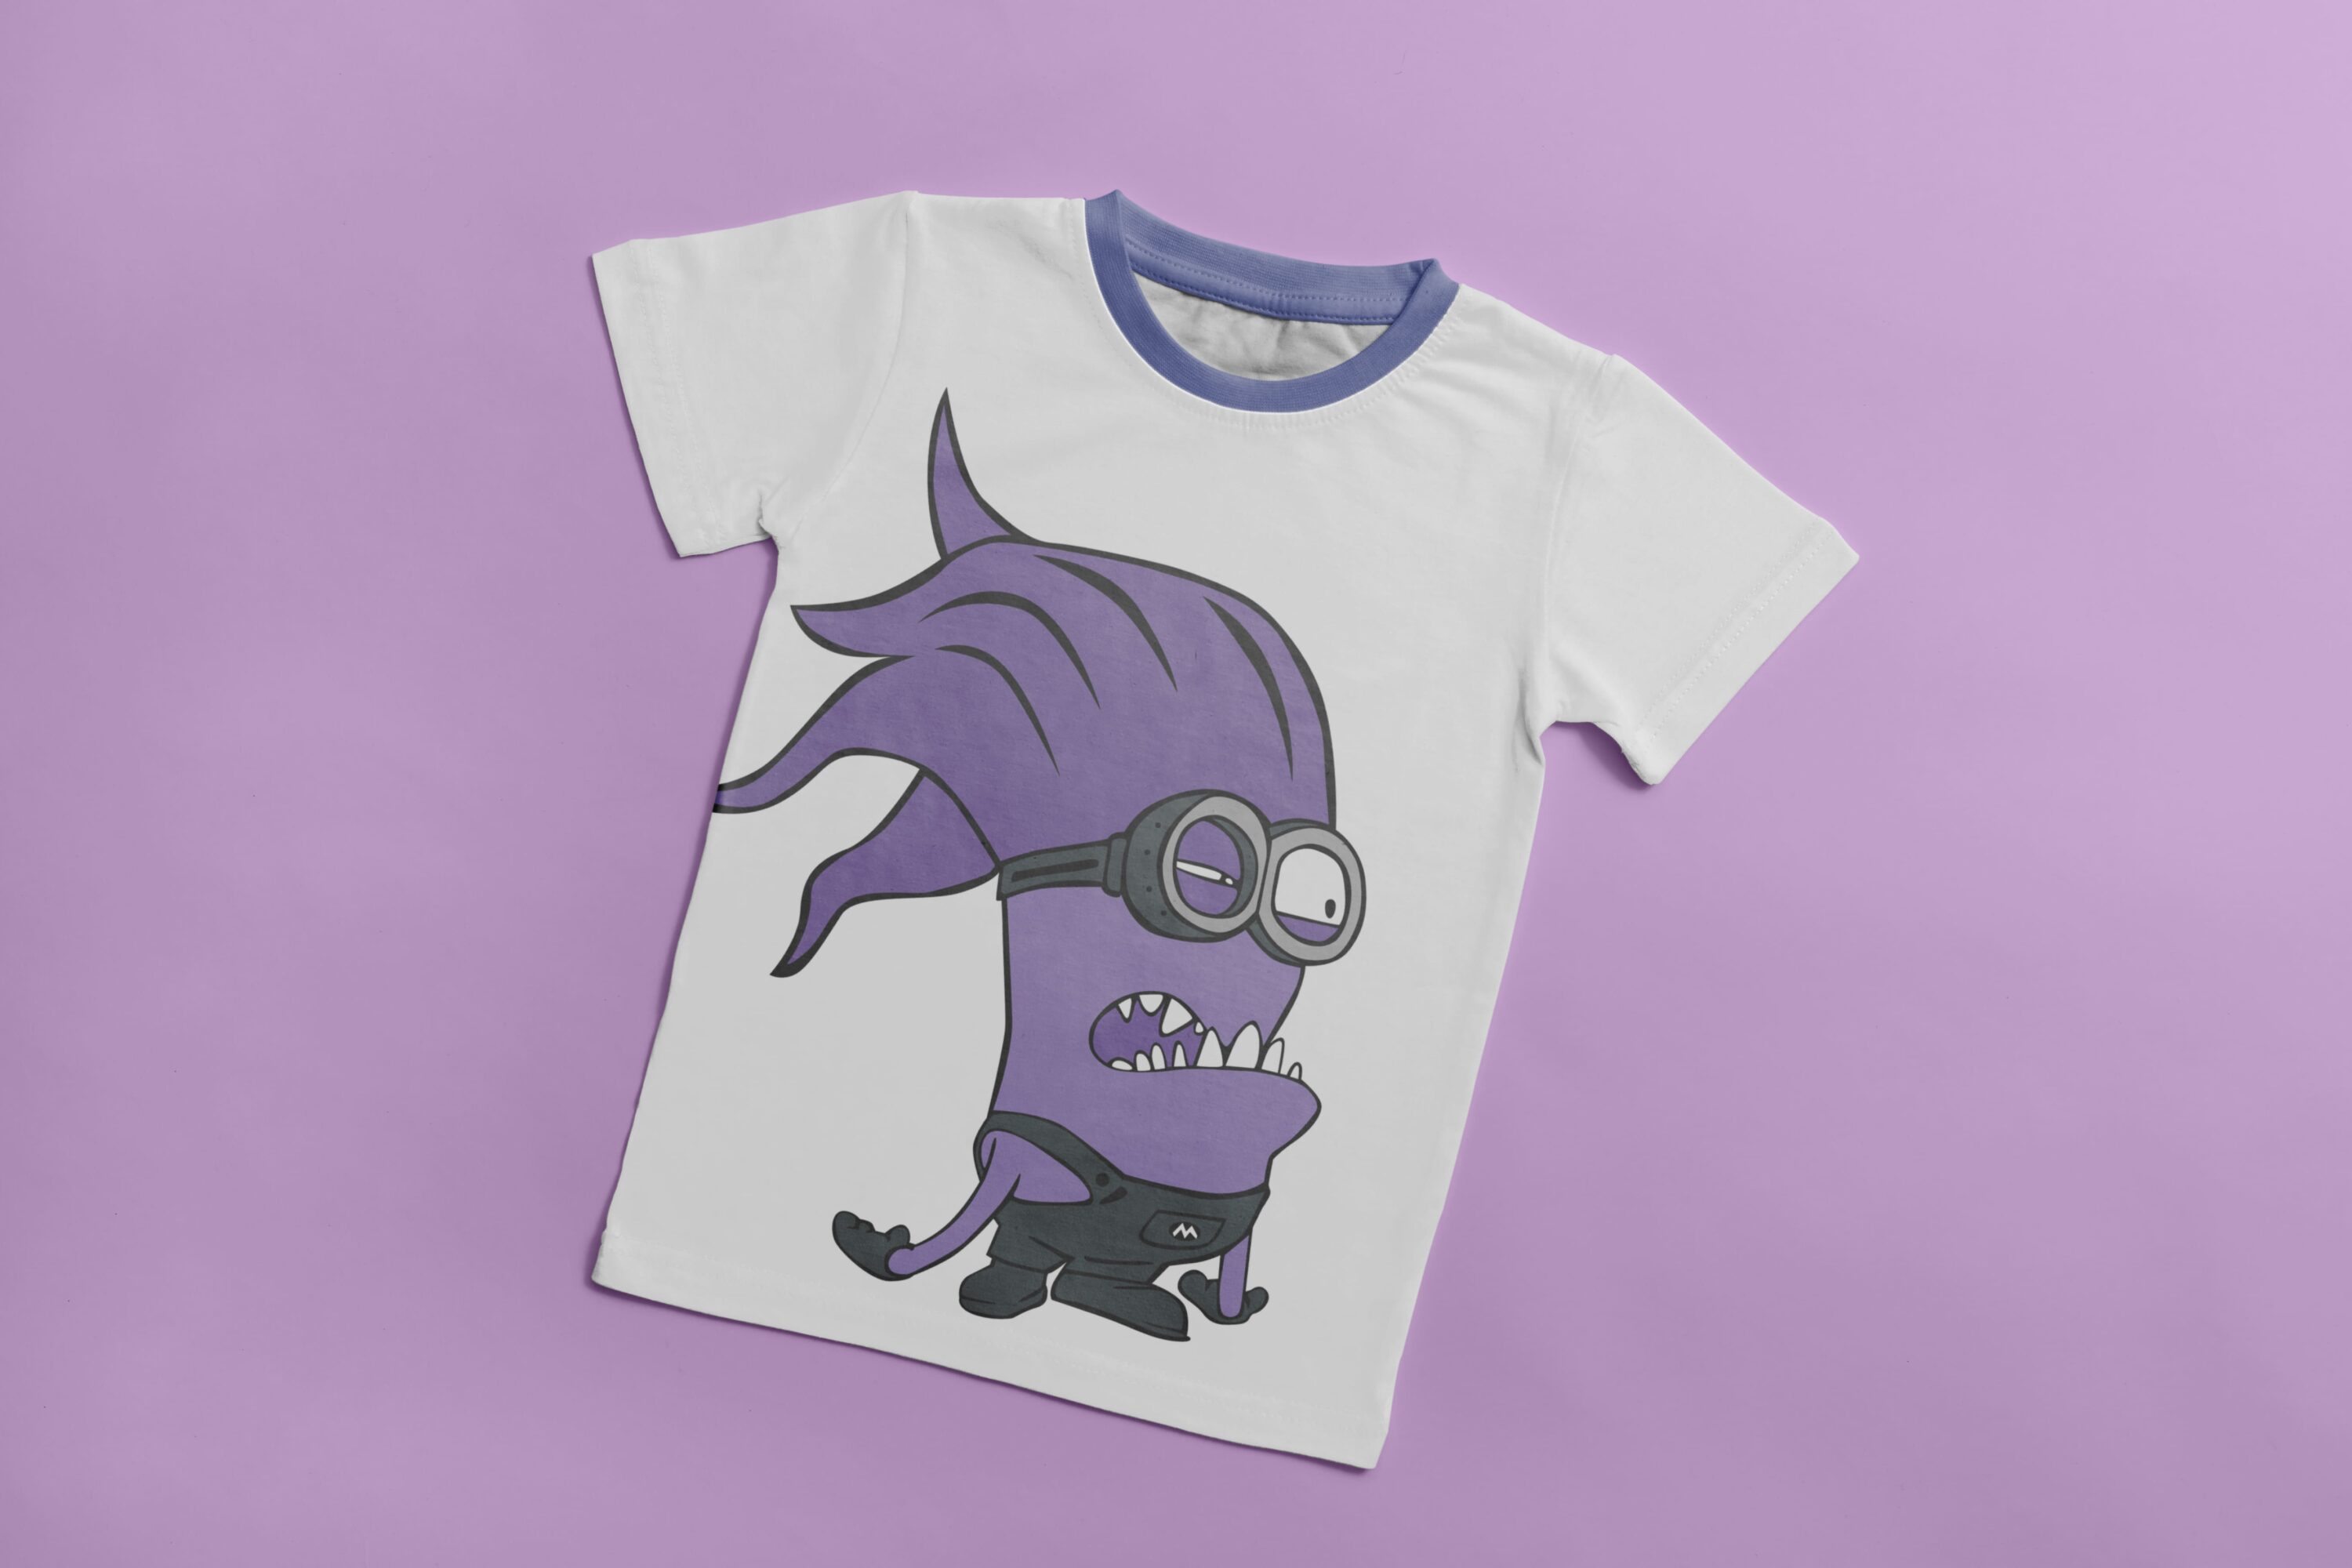 White T-shirt with a purple collar and an image angry character Evil Minion.